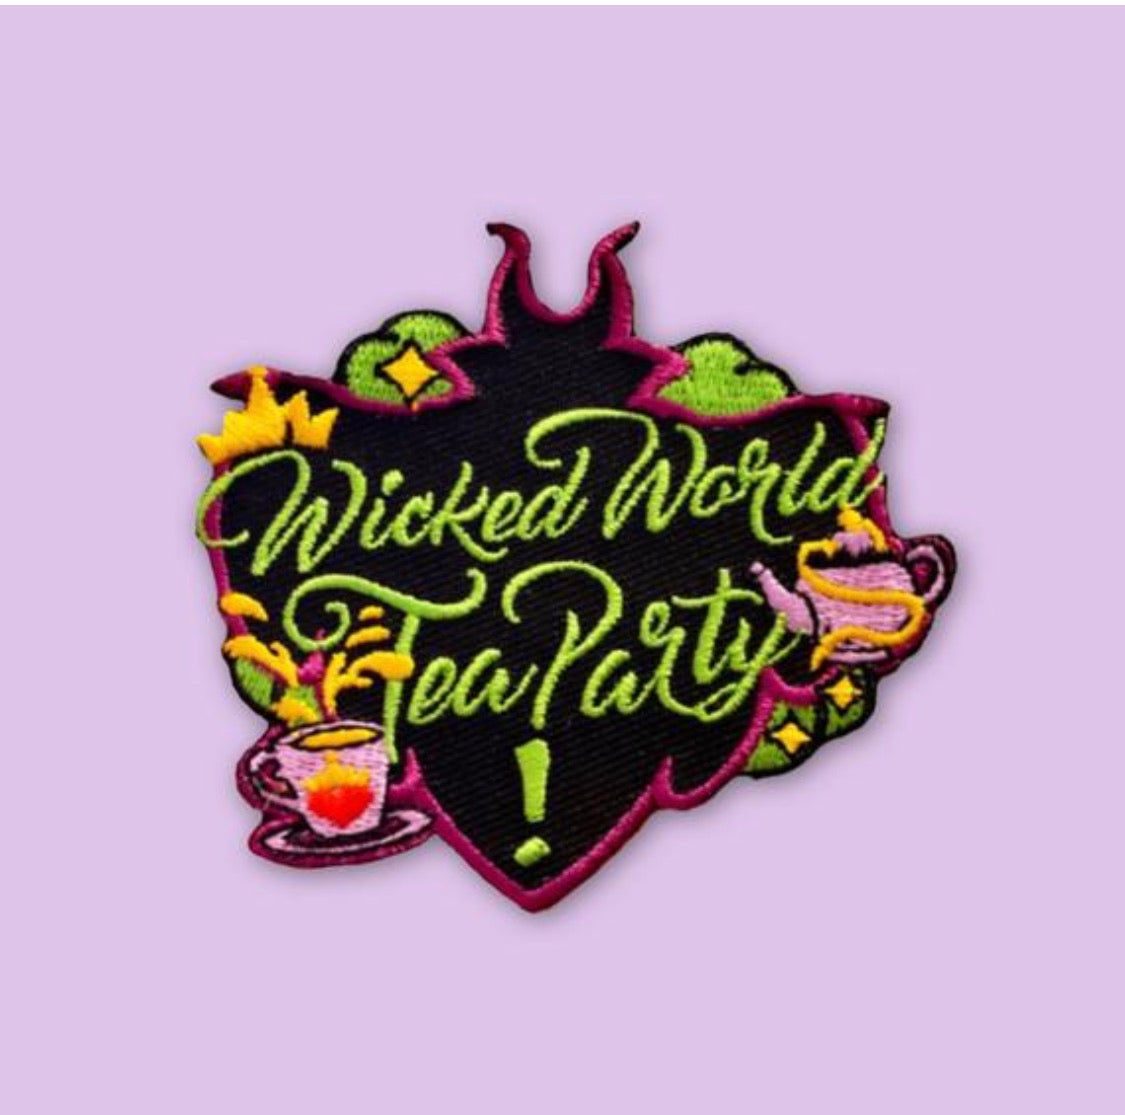 Wicked World Tea Party Patch – Mad About Patches